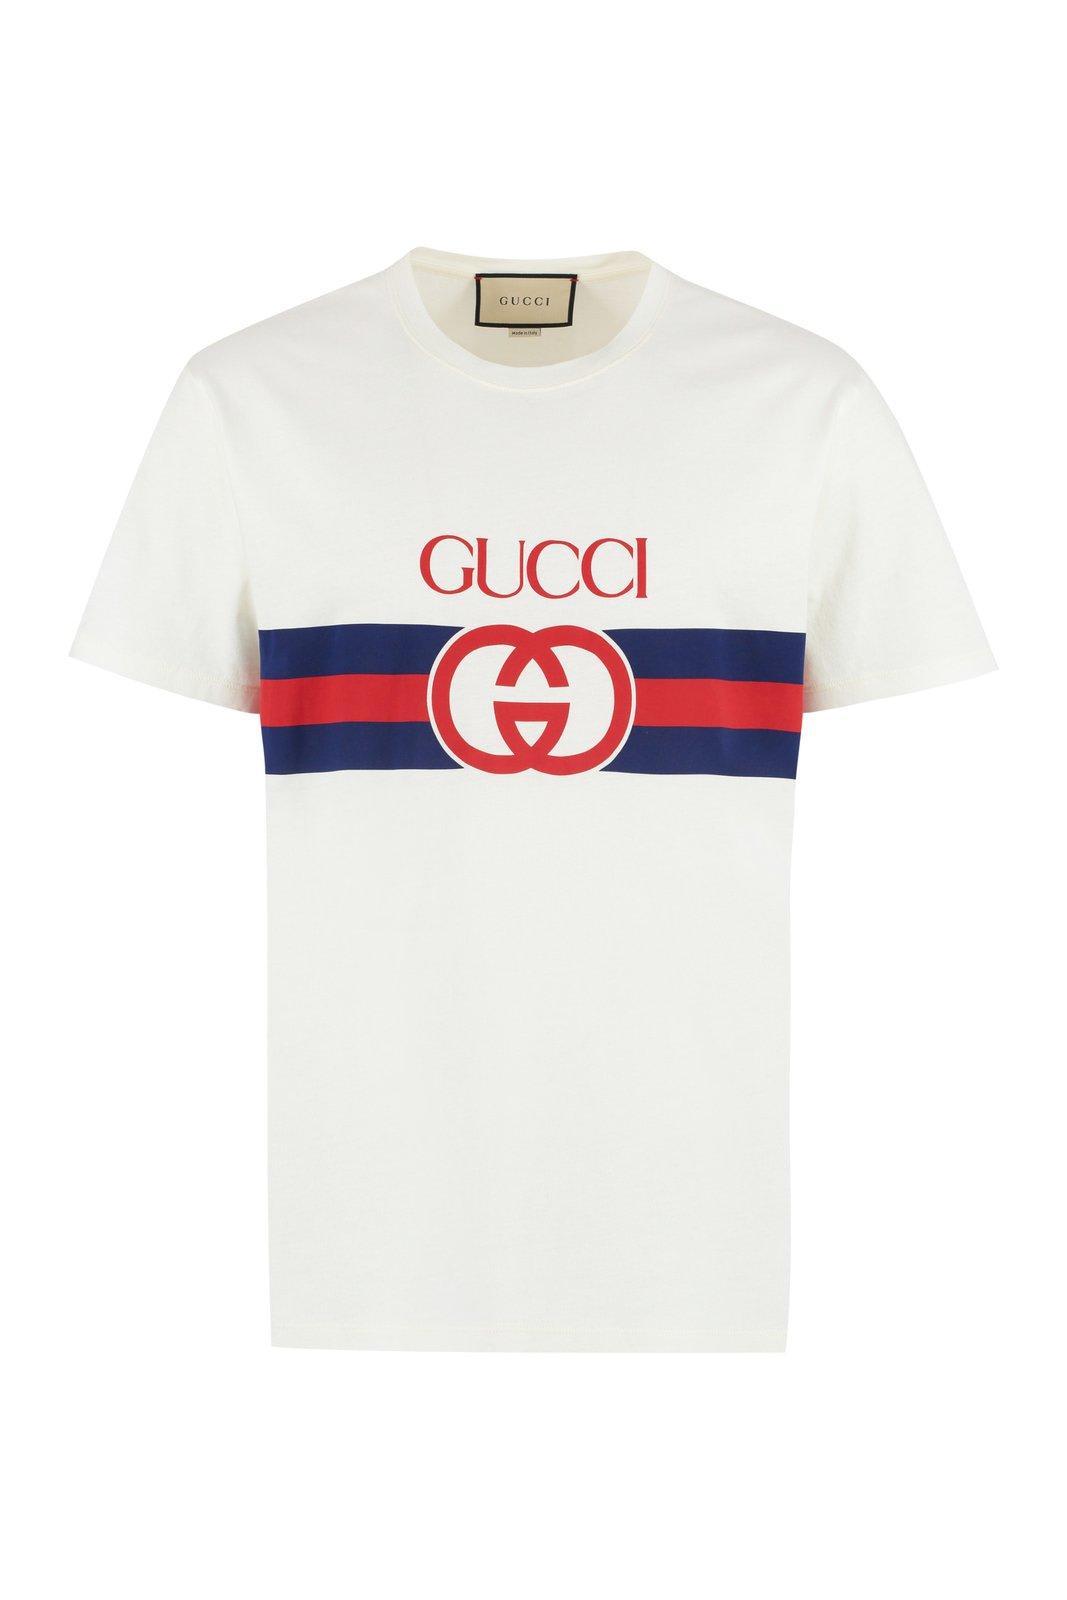 Gucci Round GG Printed T-shirt in White for Men | Lyst